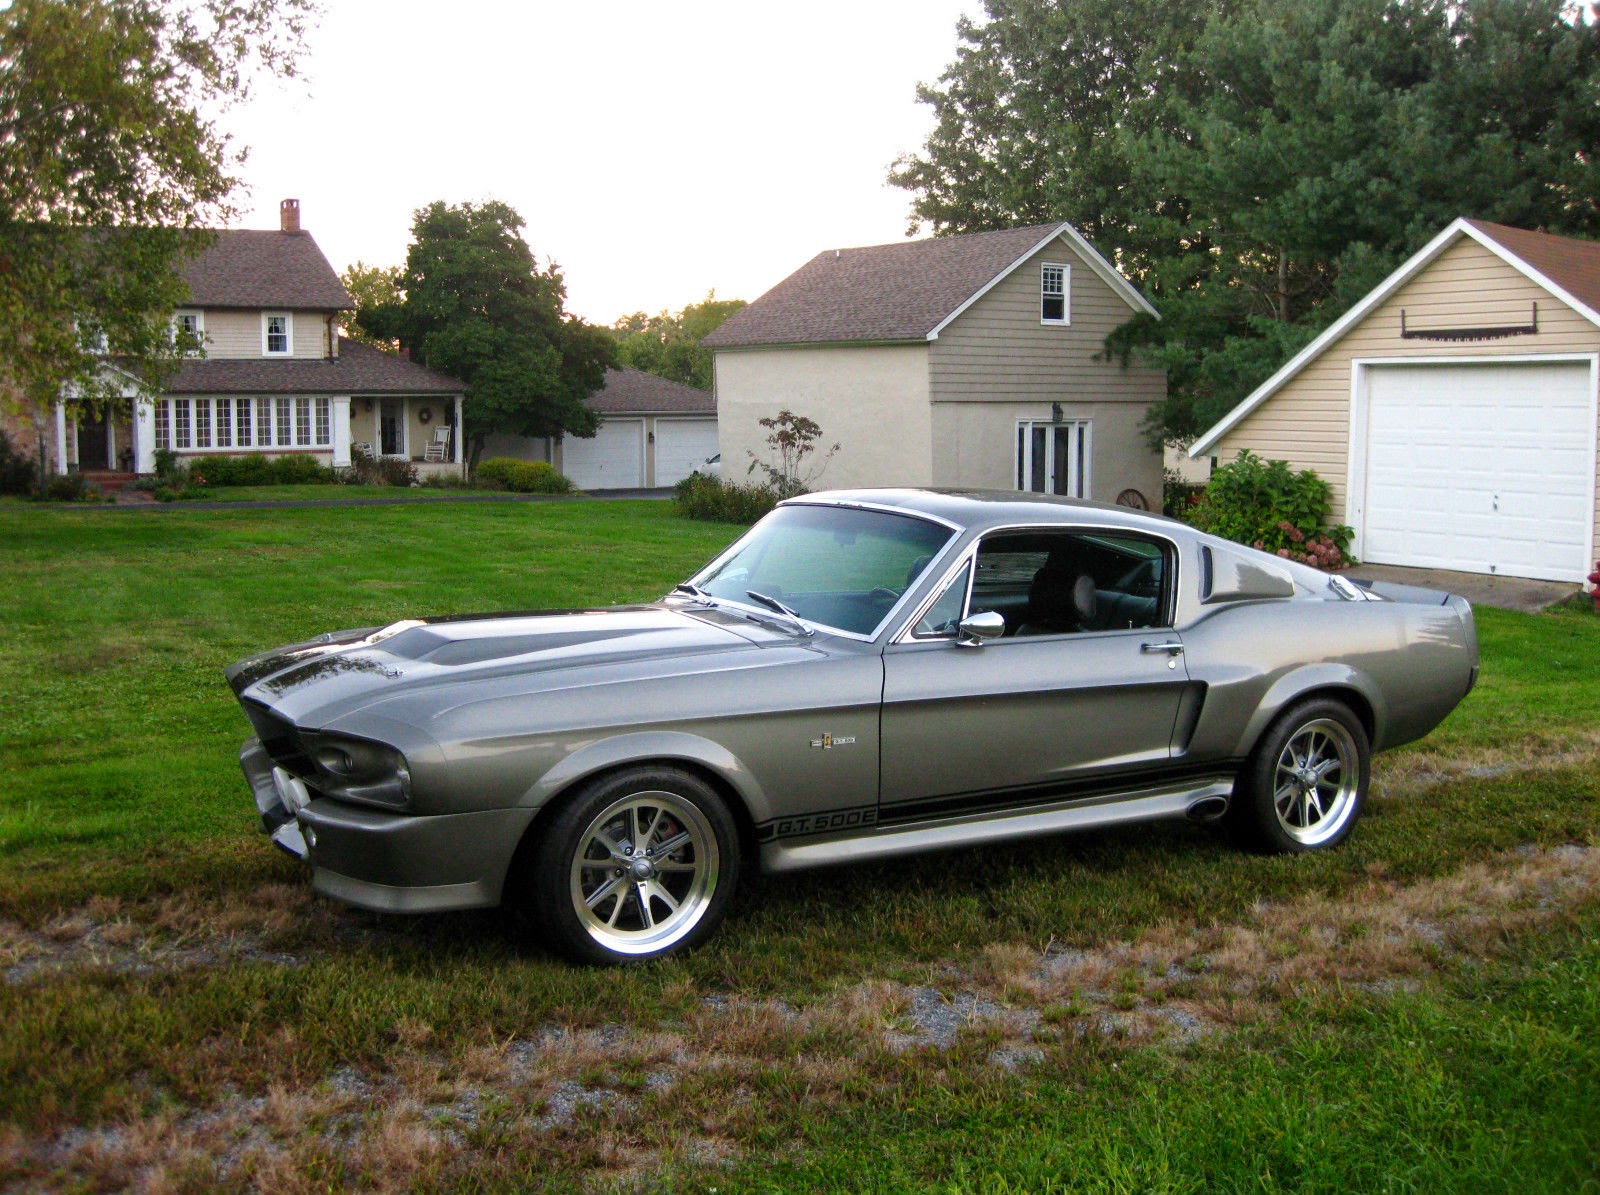 Ford Mustang Shelby Gt 500 Eleanor 1967 Prix - Ford Mustang GT 500 ... 1967 Ford Mustang Eleanor